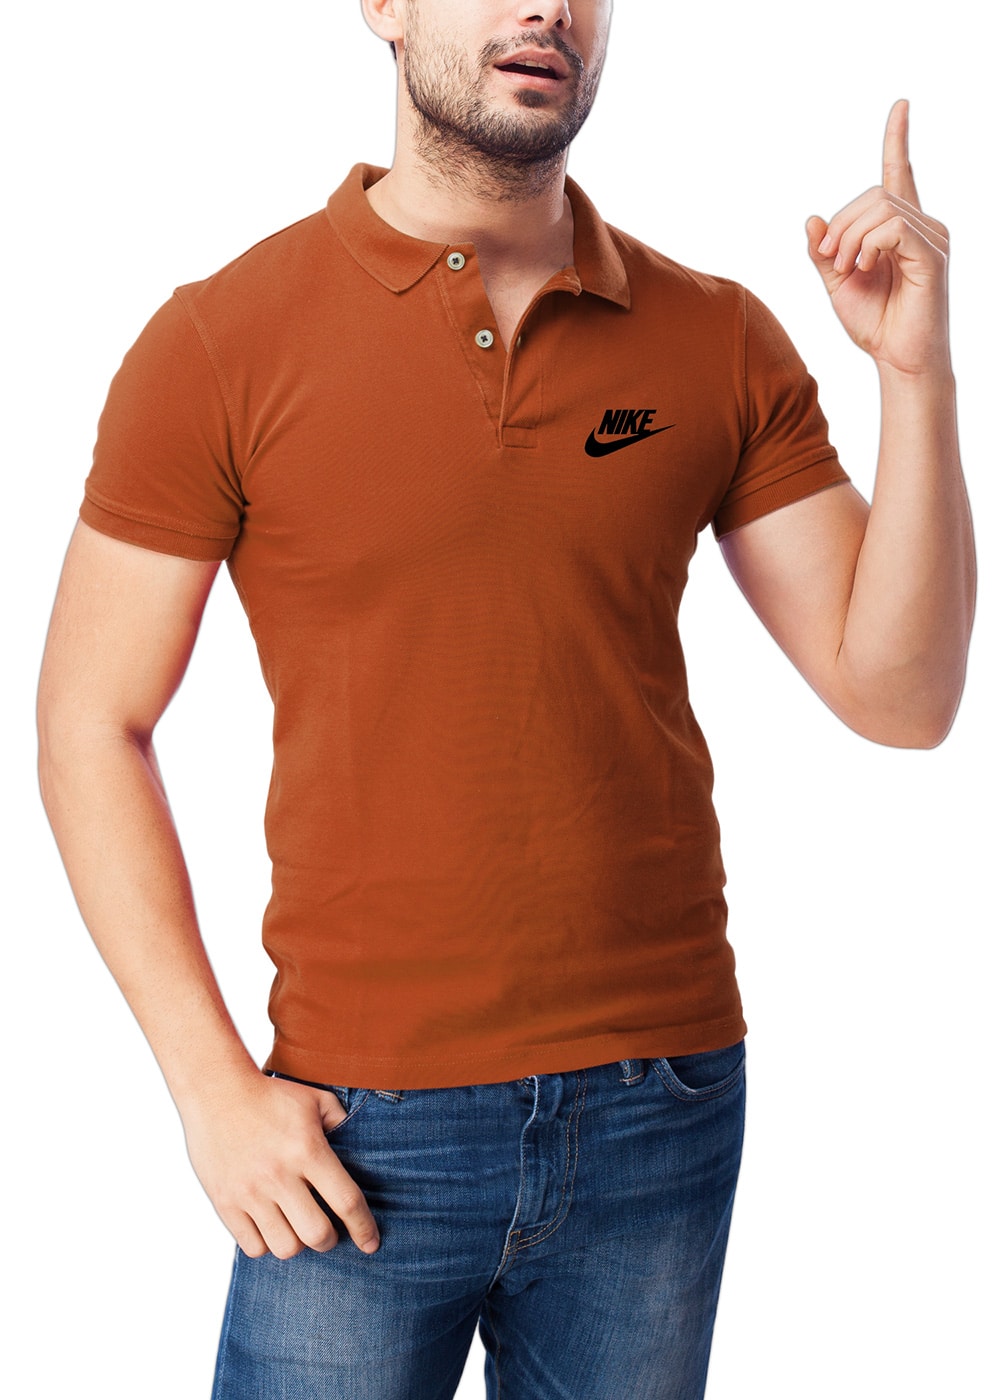 Download Download This Male Model Polo Shirt Mockup In PSD - Designhooks